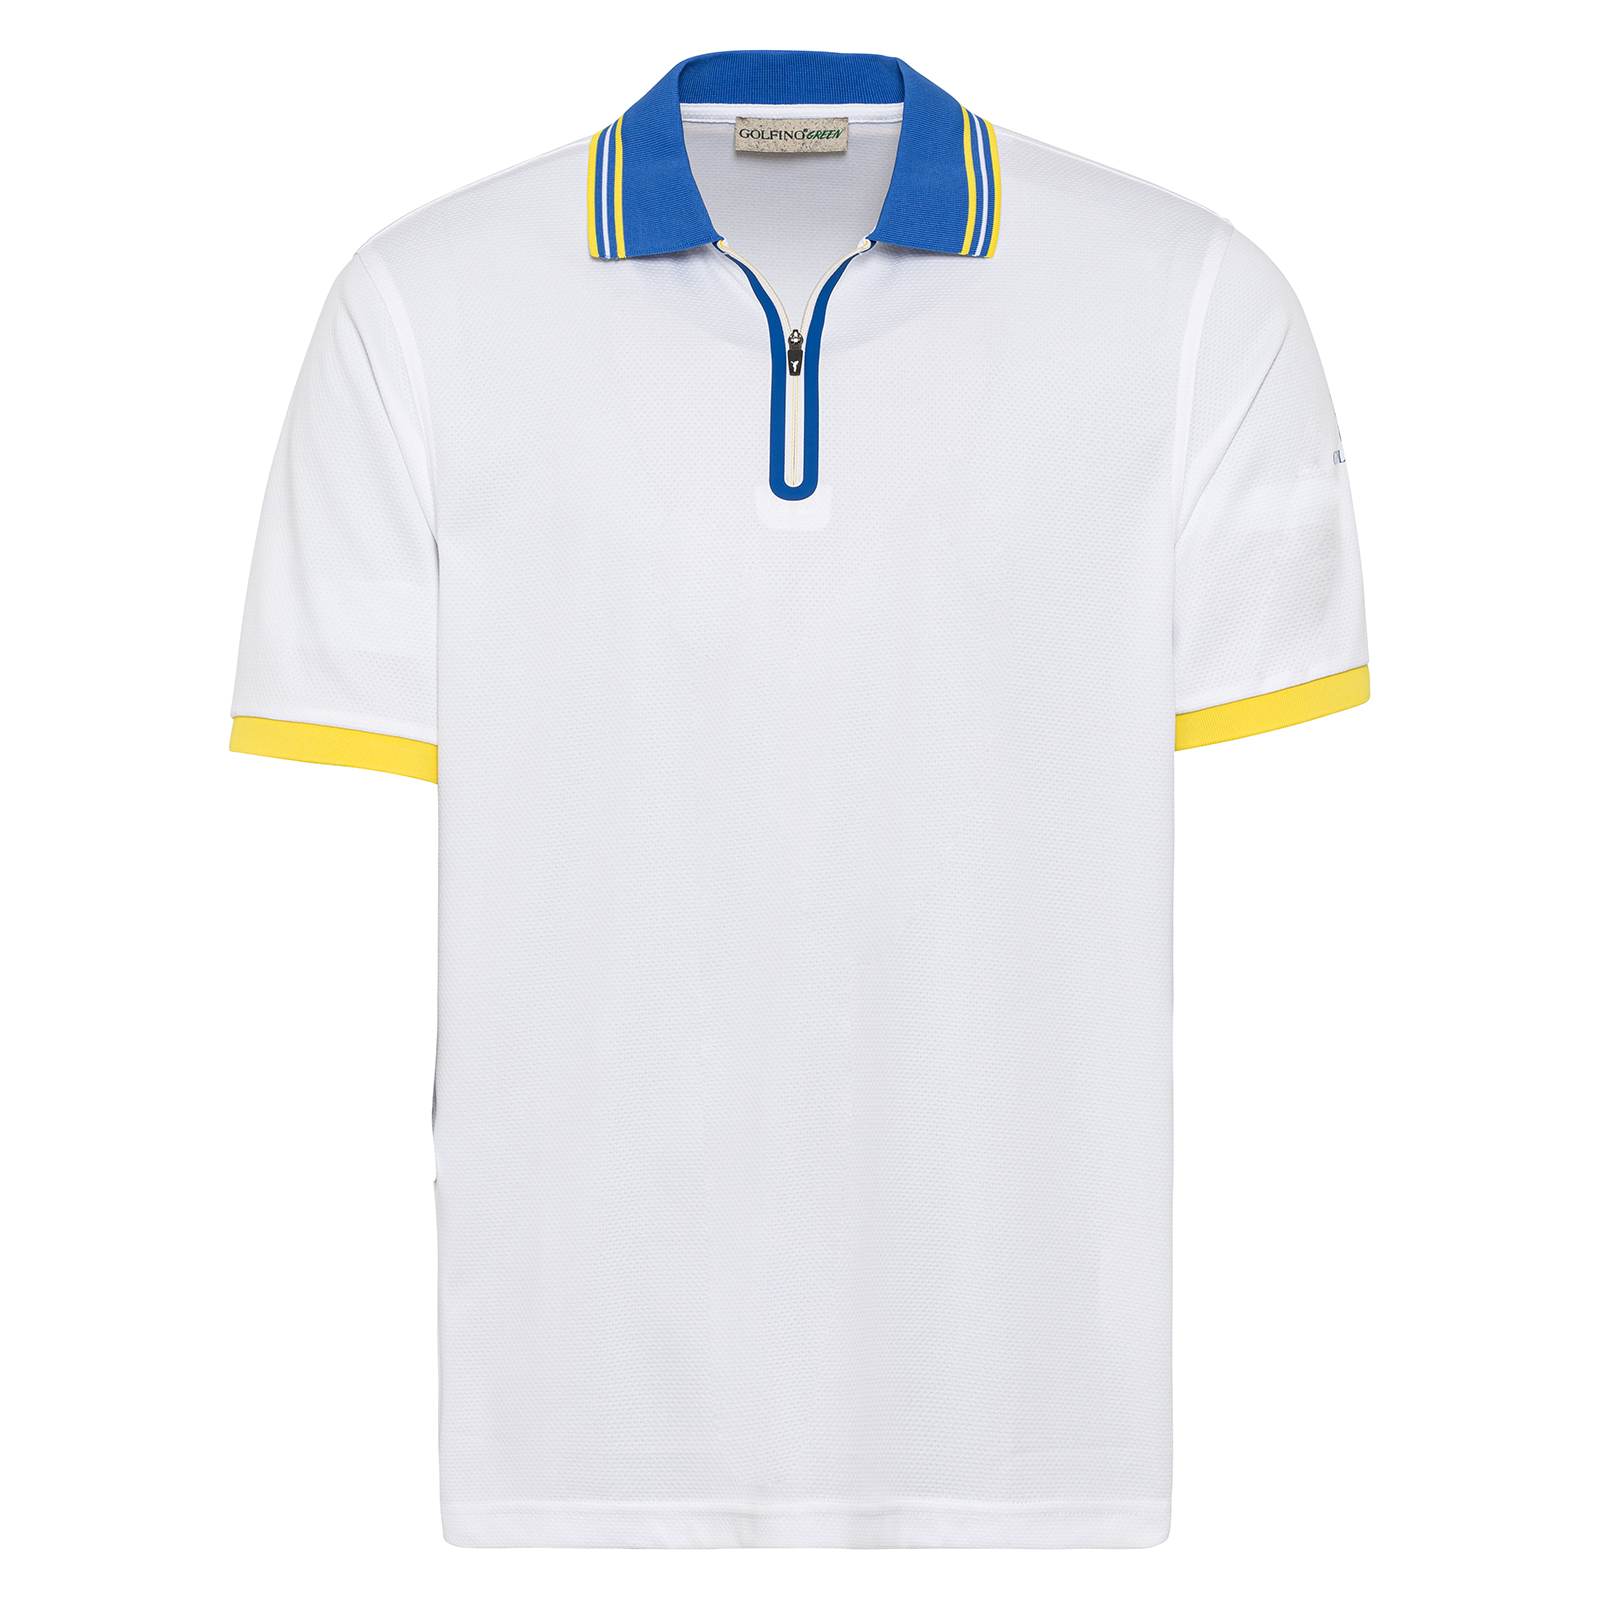 Men's sustainable golf polo shirt with Kafetex® 